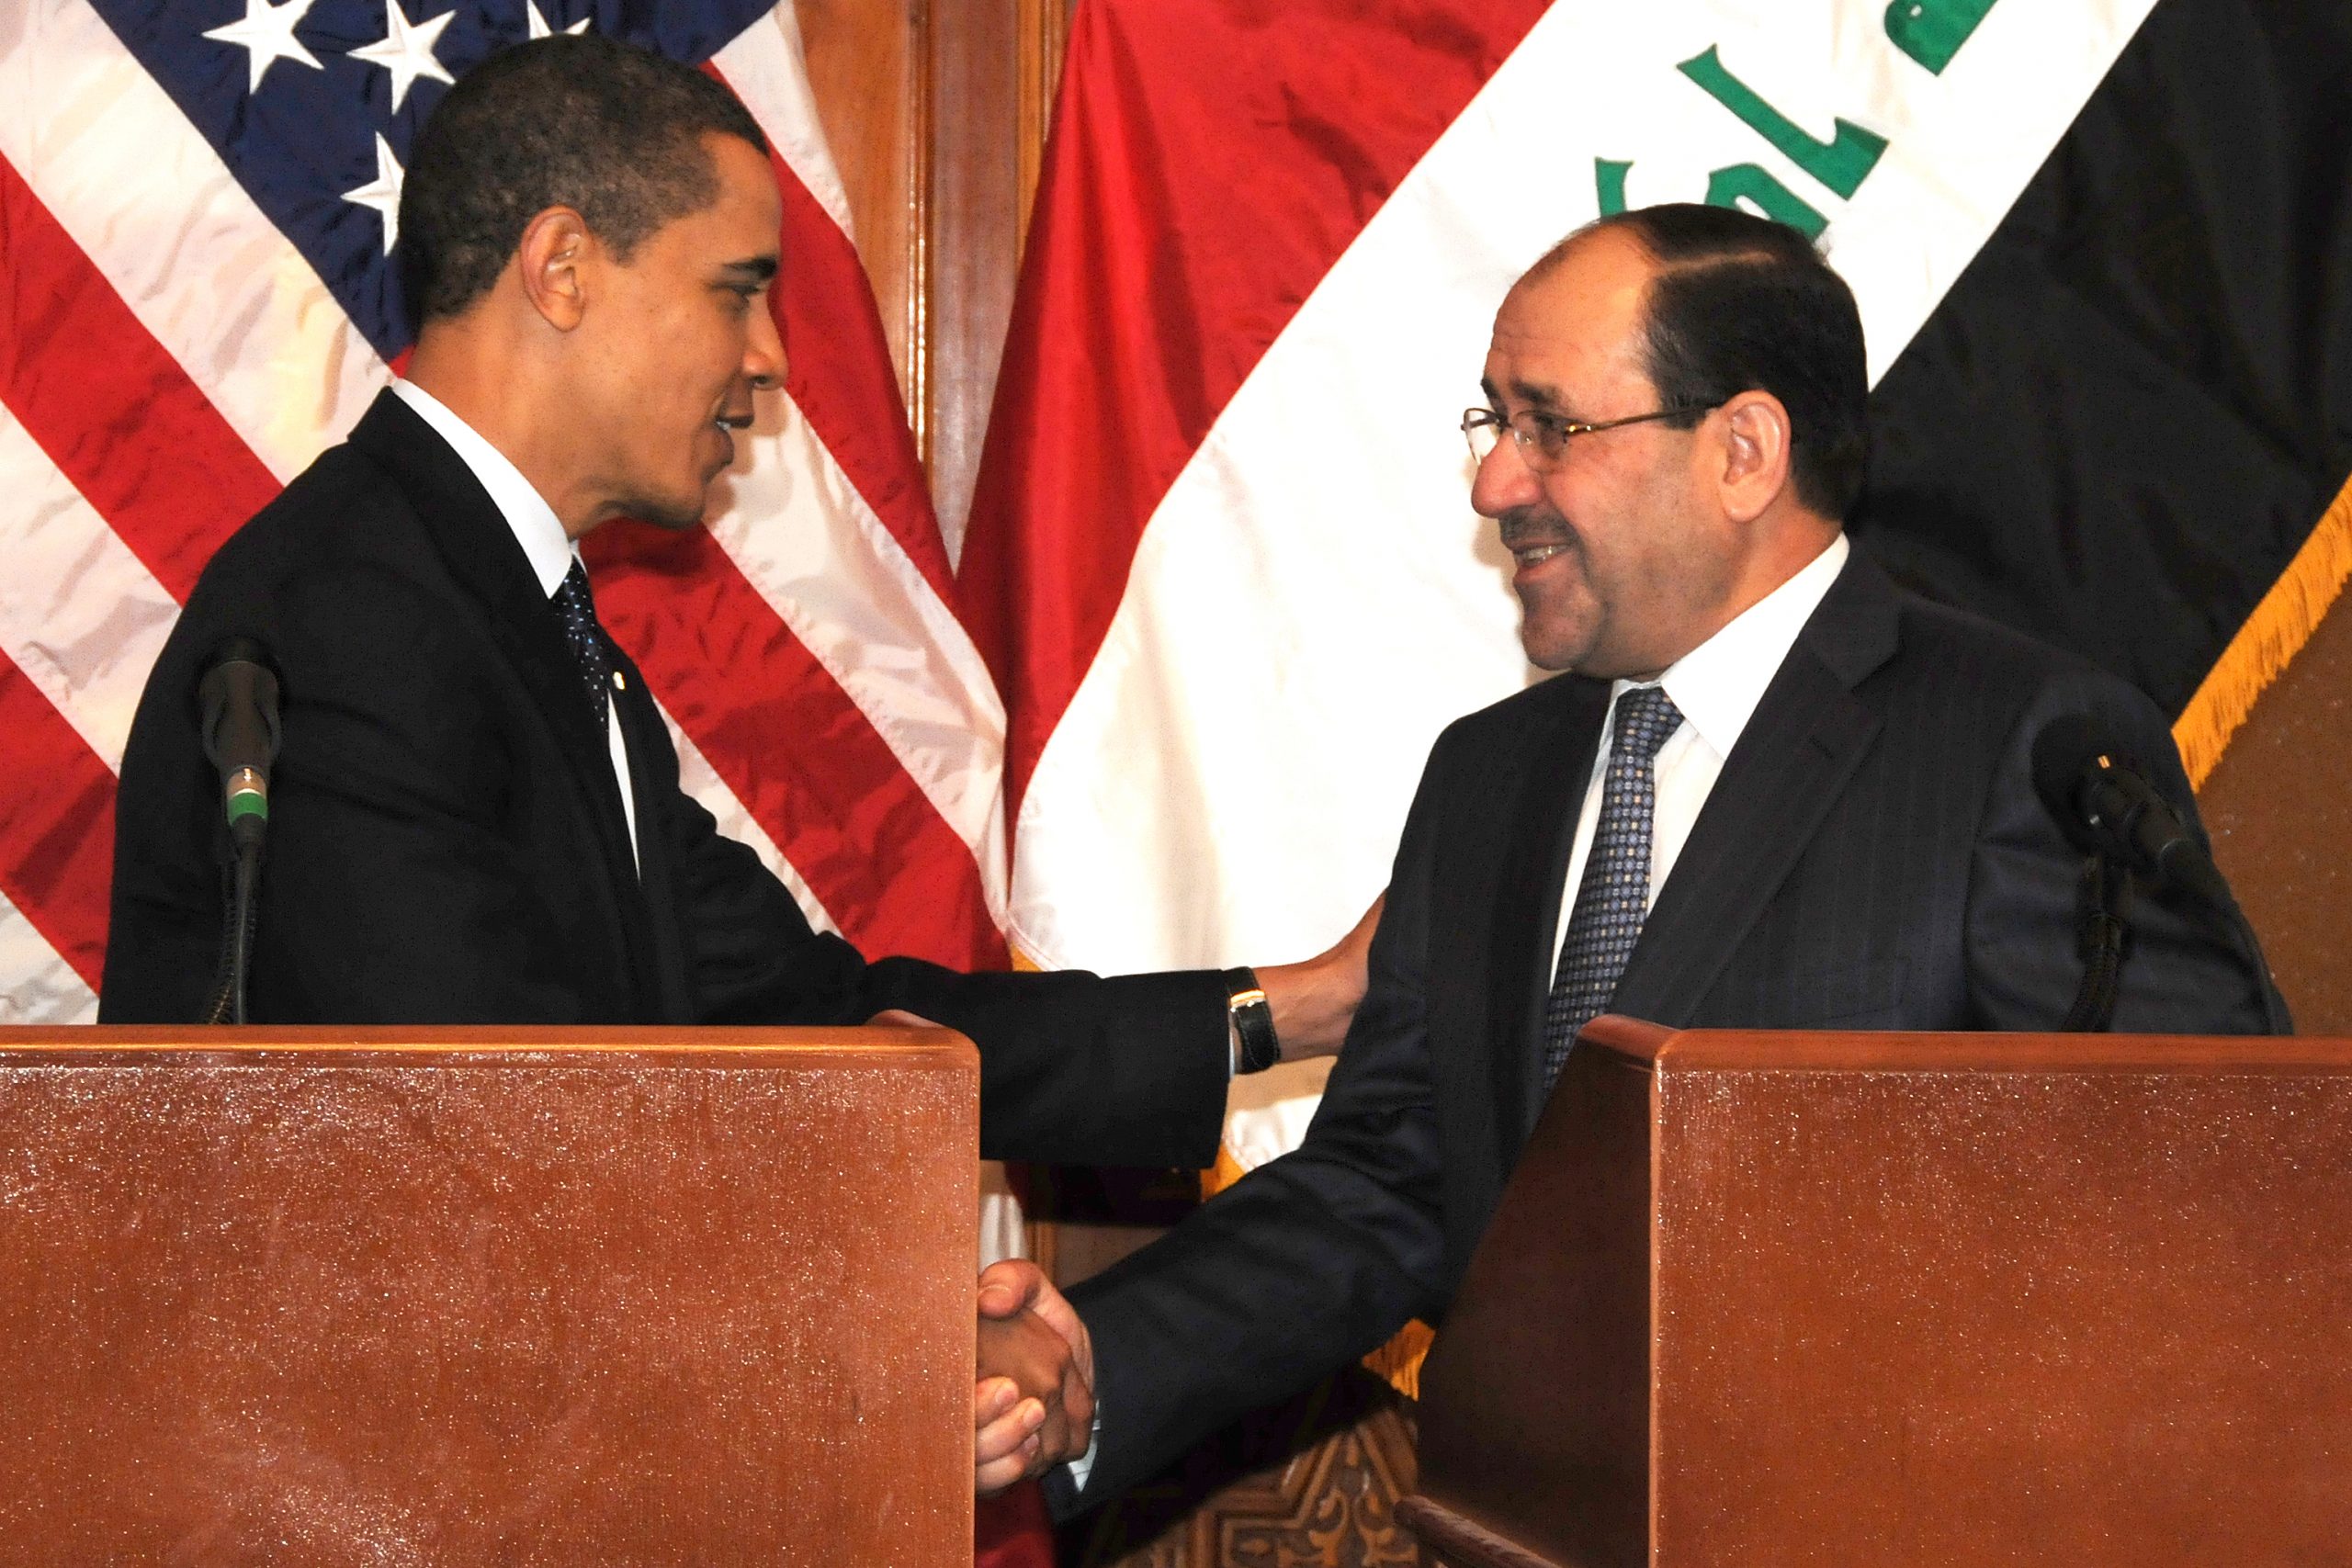 US President Barack Obama shakes hands with Prime Minister Nouri al-Maliki after a joint press event on Camp Victory, Iraq, April 7. (Photo by US Army Spc. Kimberly Millett, MNF-I Public Affairs)